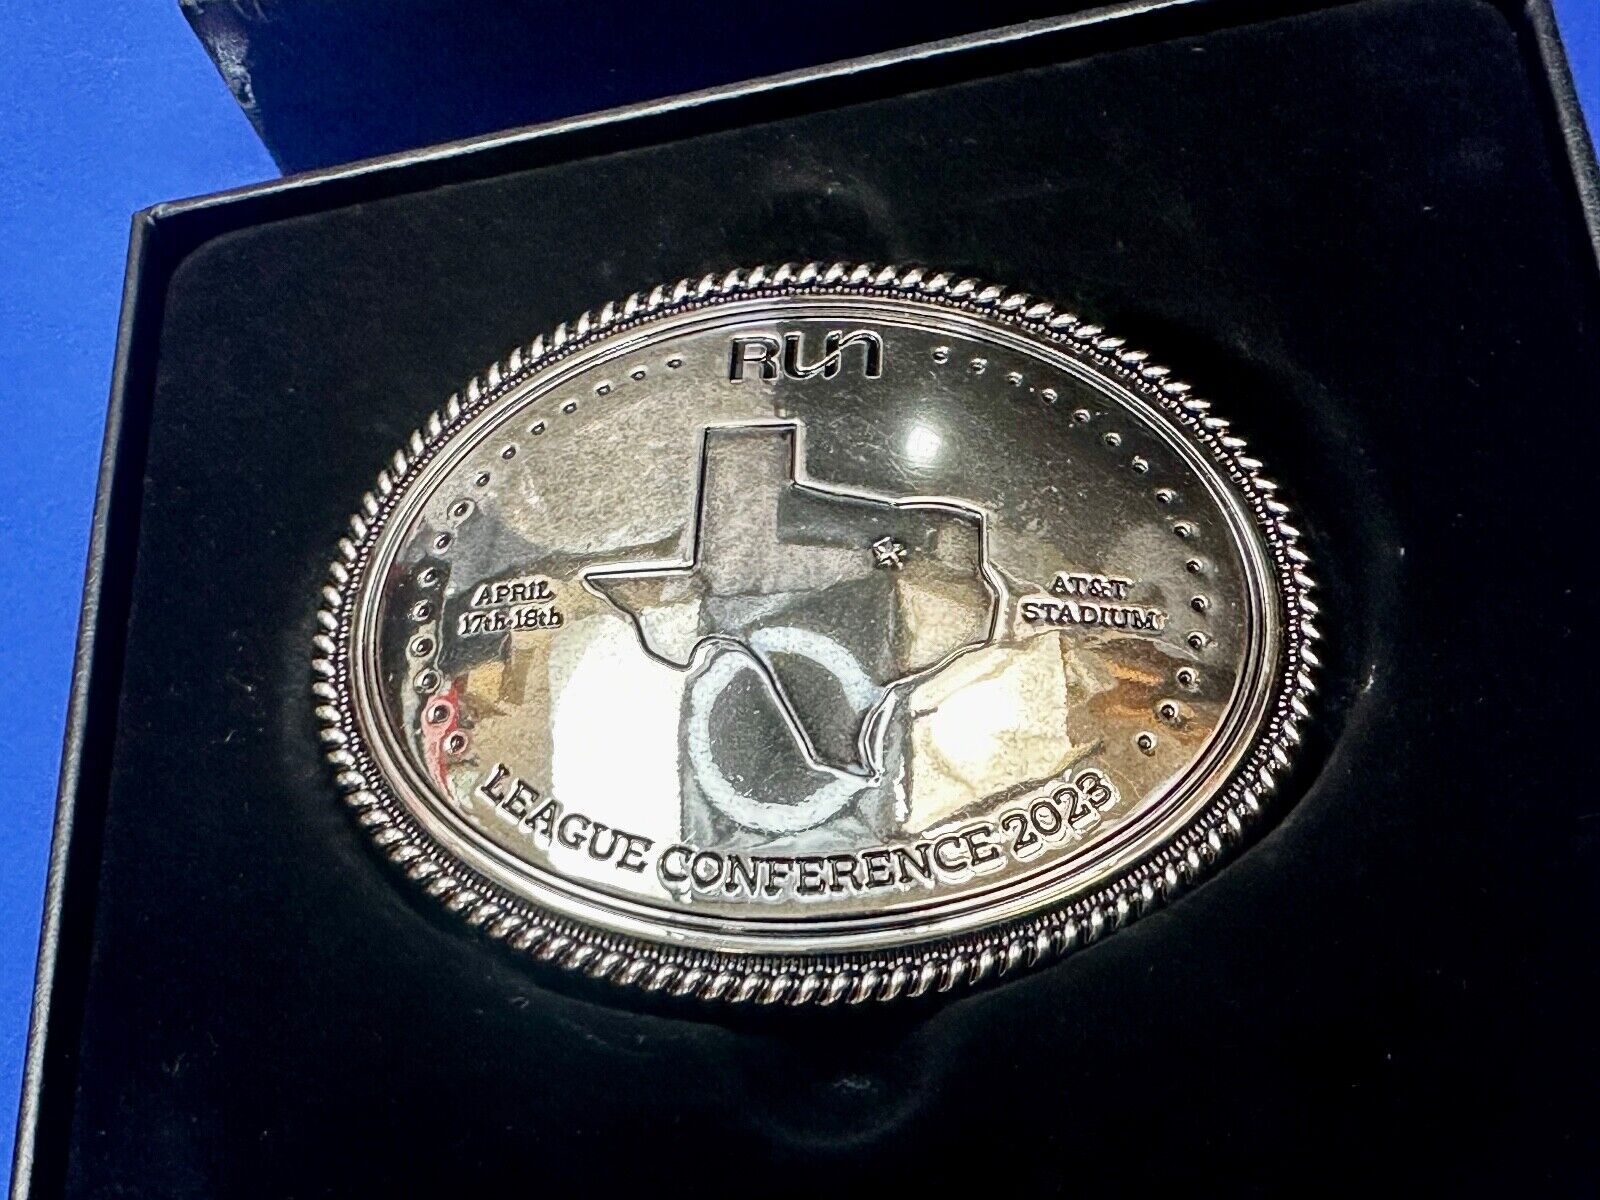 Texas RUN  April 17th - 18th. AT&T Stadium League Conference 2023 Belt Buckle